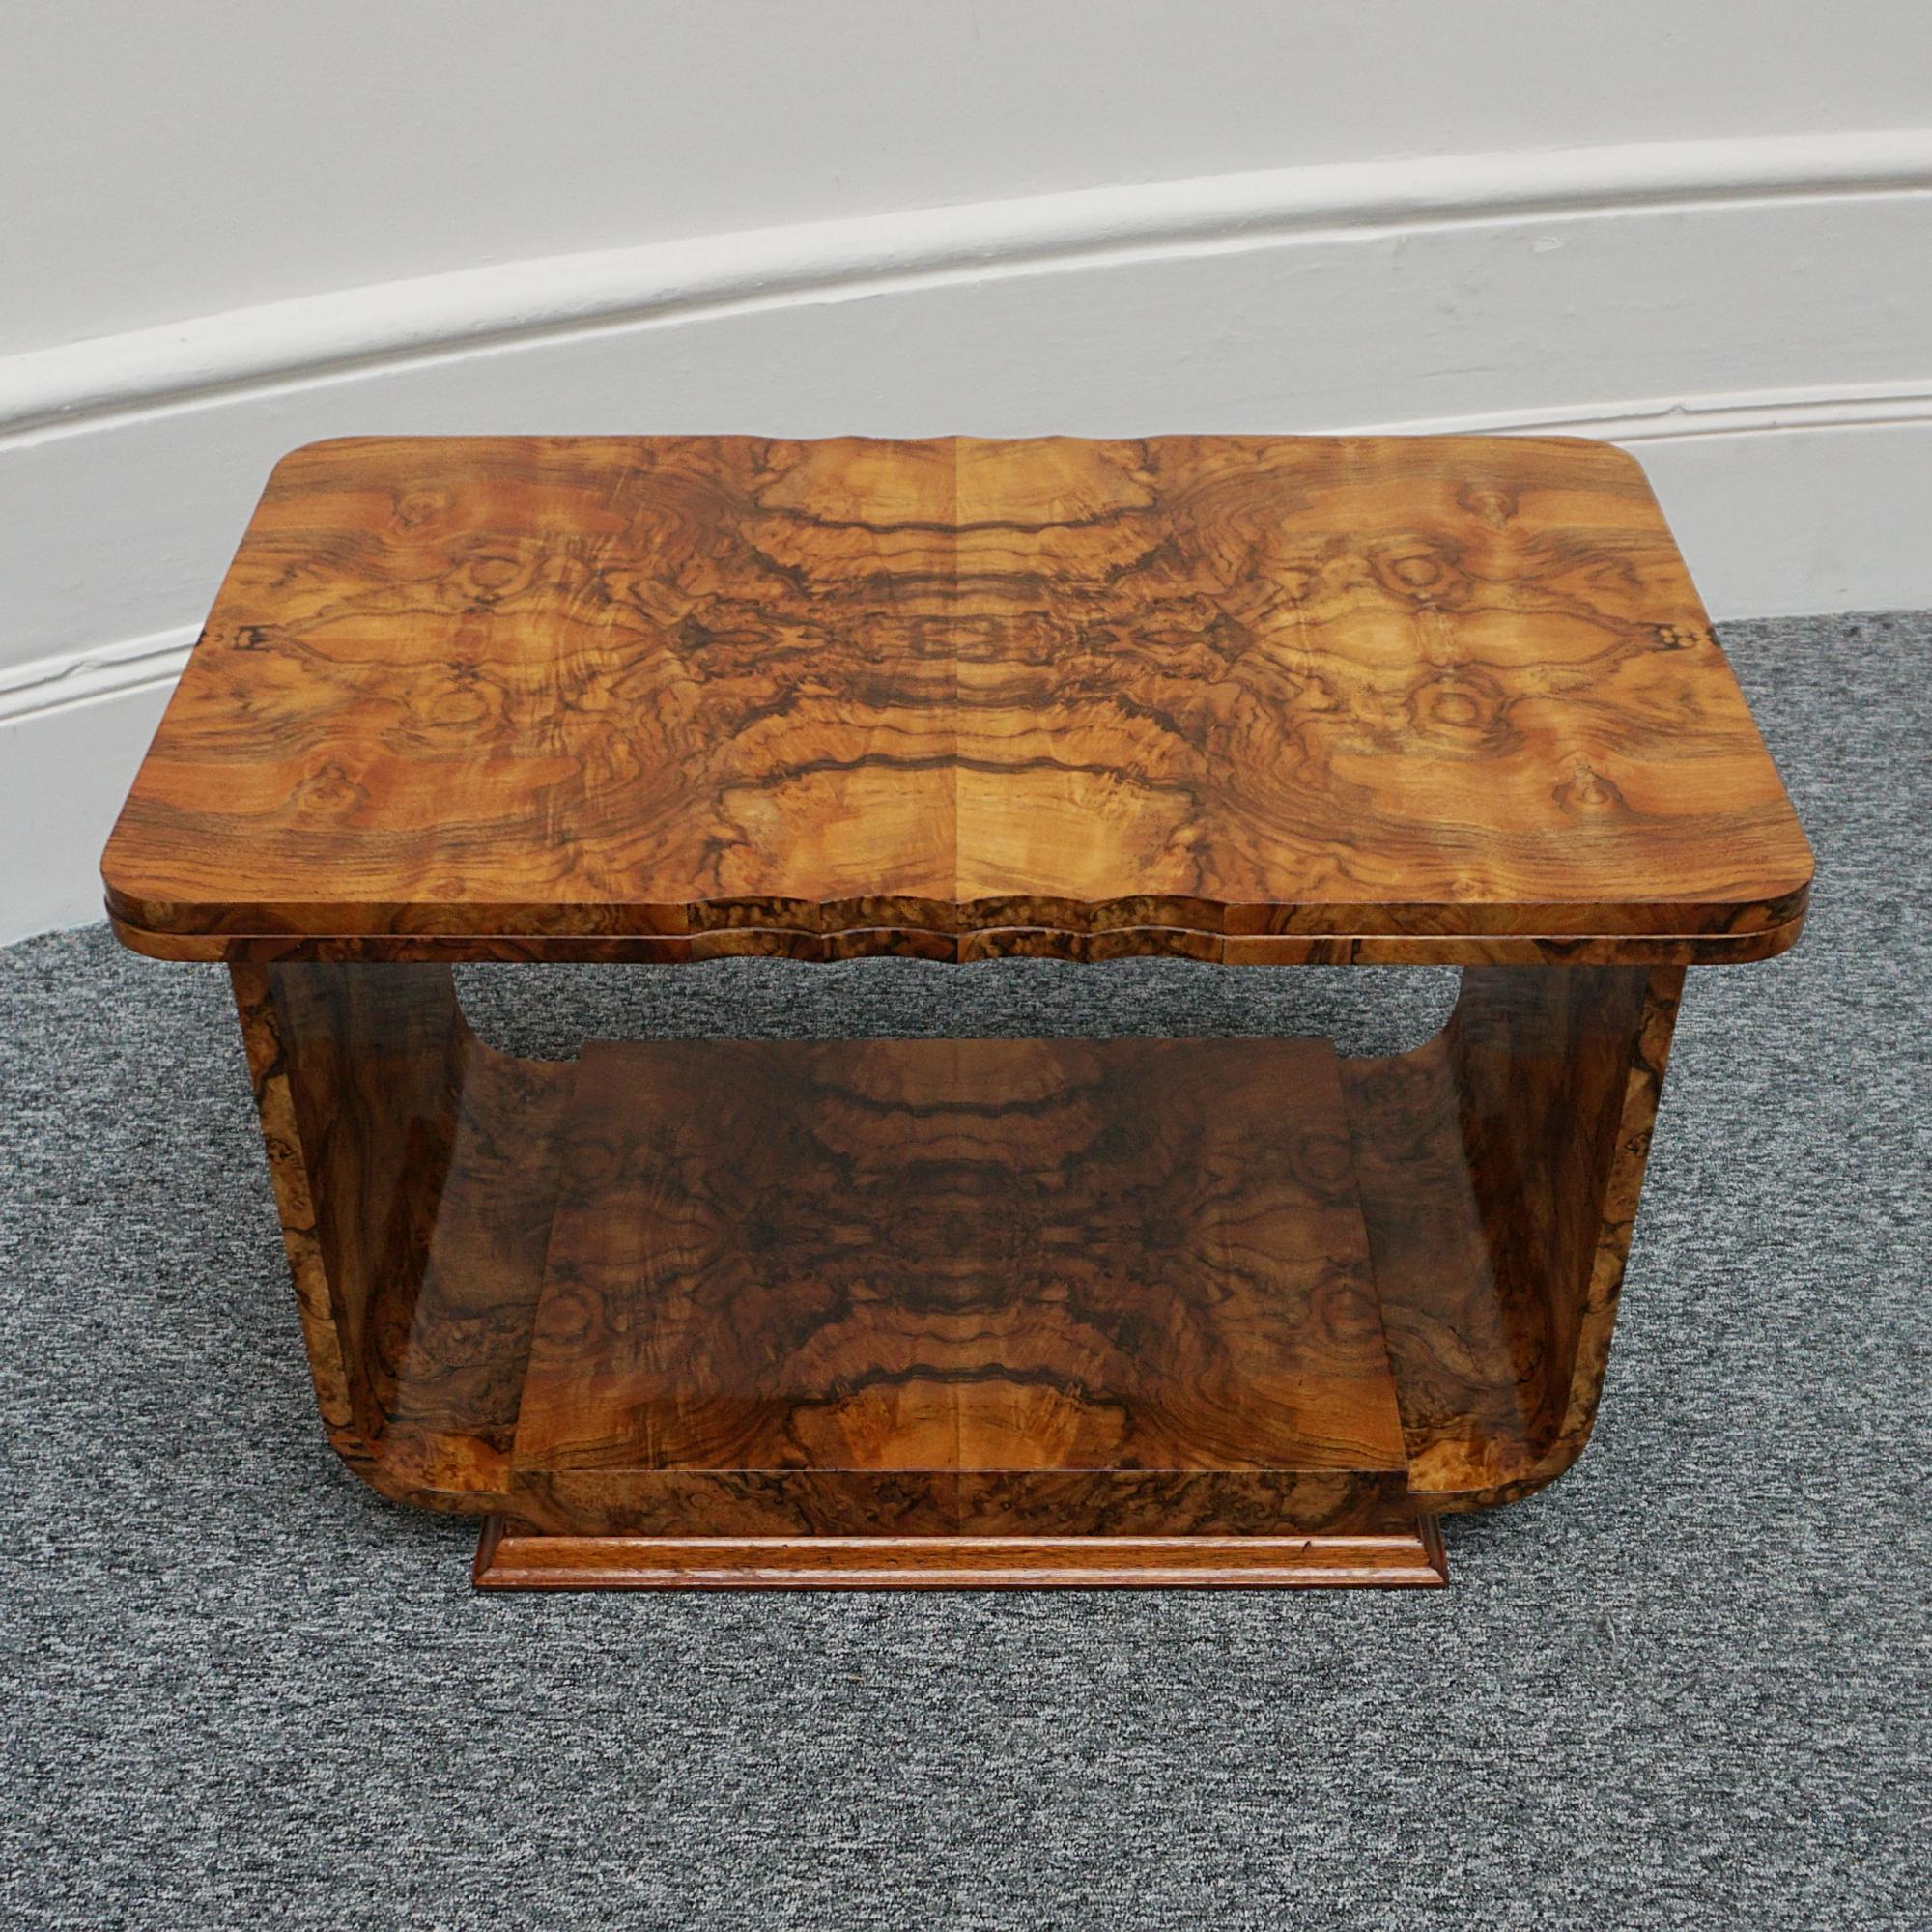 An Art Deco coffee table. Burr walnut veneered on solid mahogany with beveled edge over a U-shaped base. Excellent condition. 

Item Number: 2703243

All of our furniture is extensively polished and restored where necessary to the highest standards.